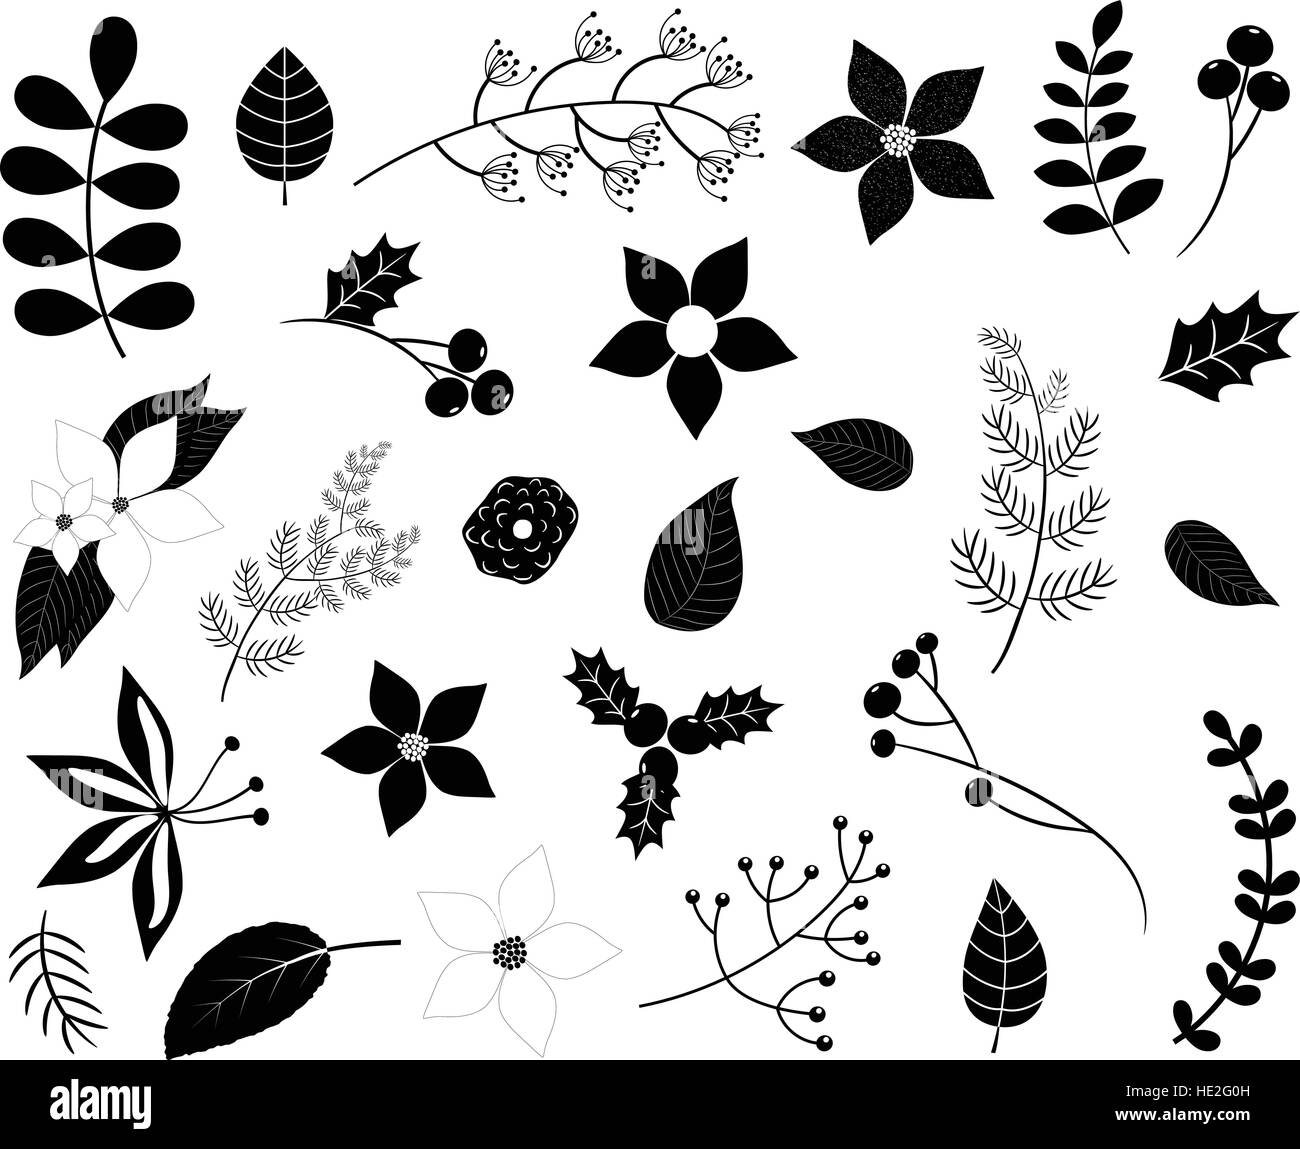 Black winter foliage silhouettes with flowers, leaves, branches and berries isolated on white Stock Vector